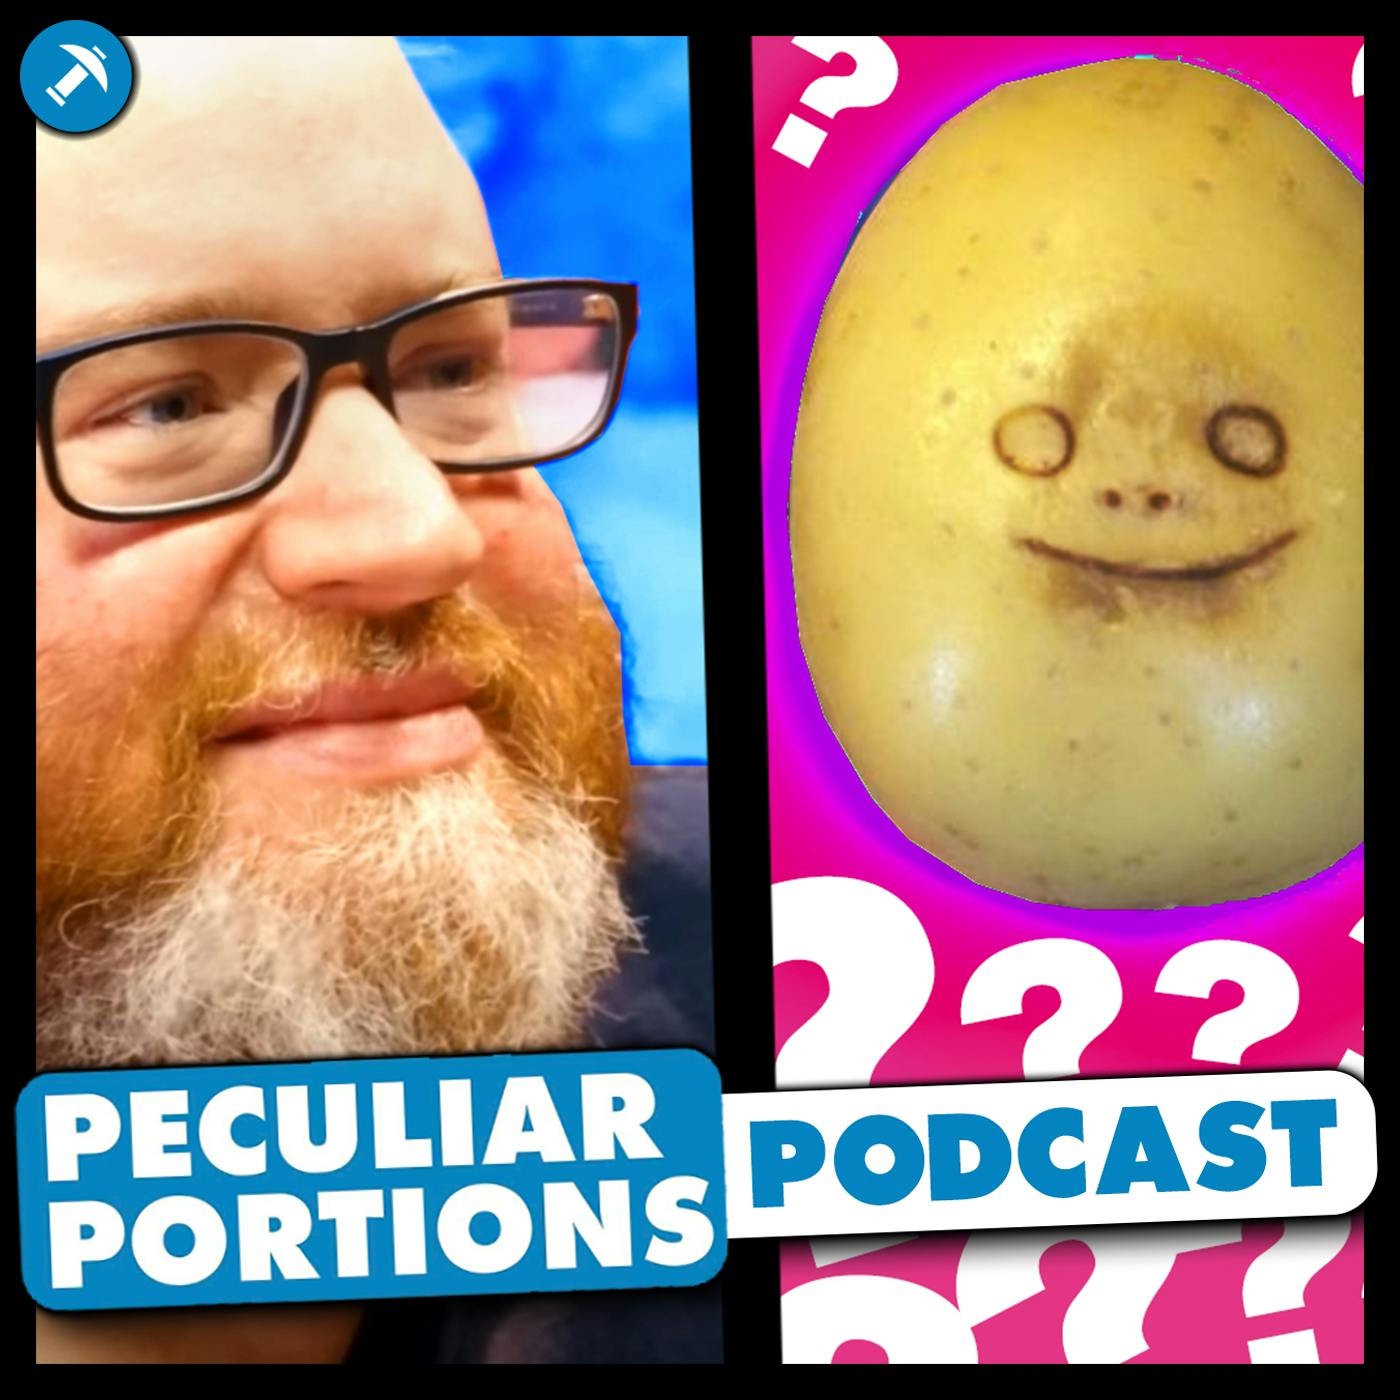 Woman keeps smiling potato for 5 years - Peculiar Portions Podcast #59